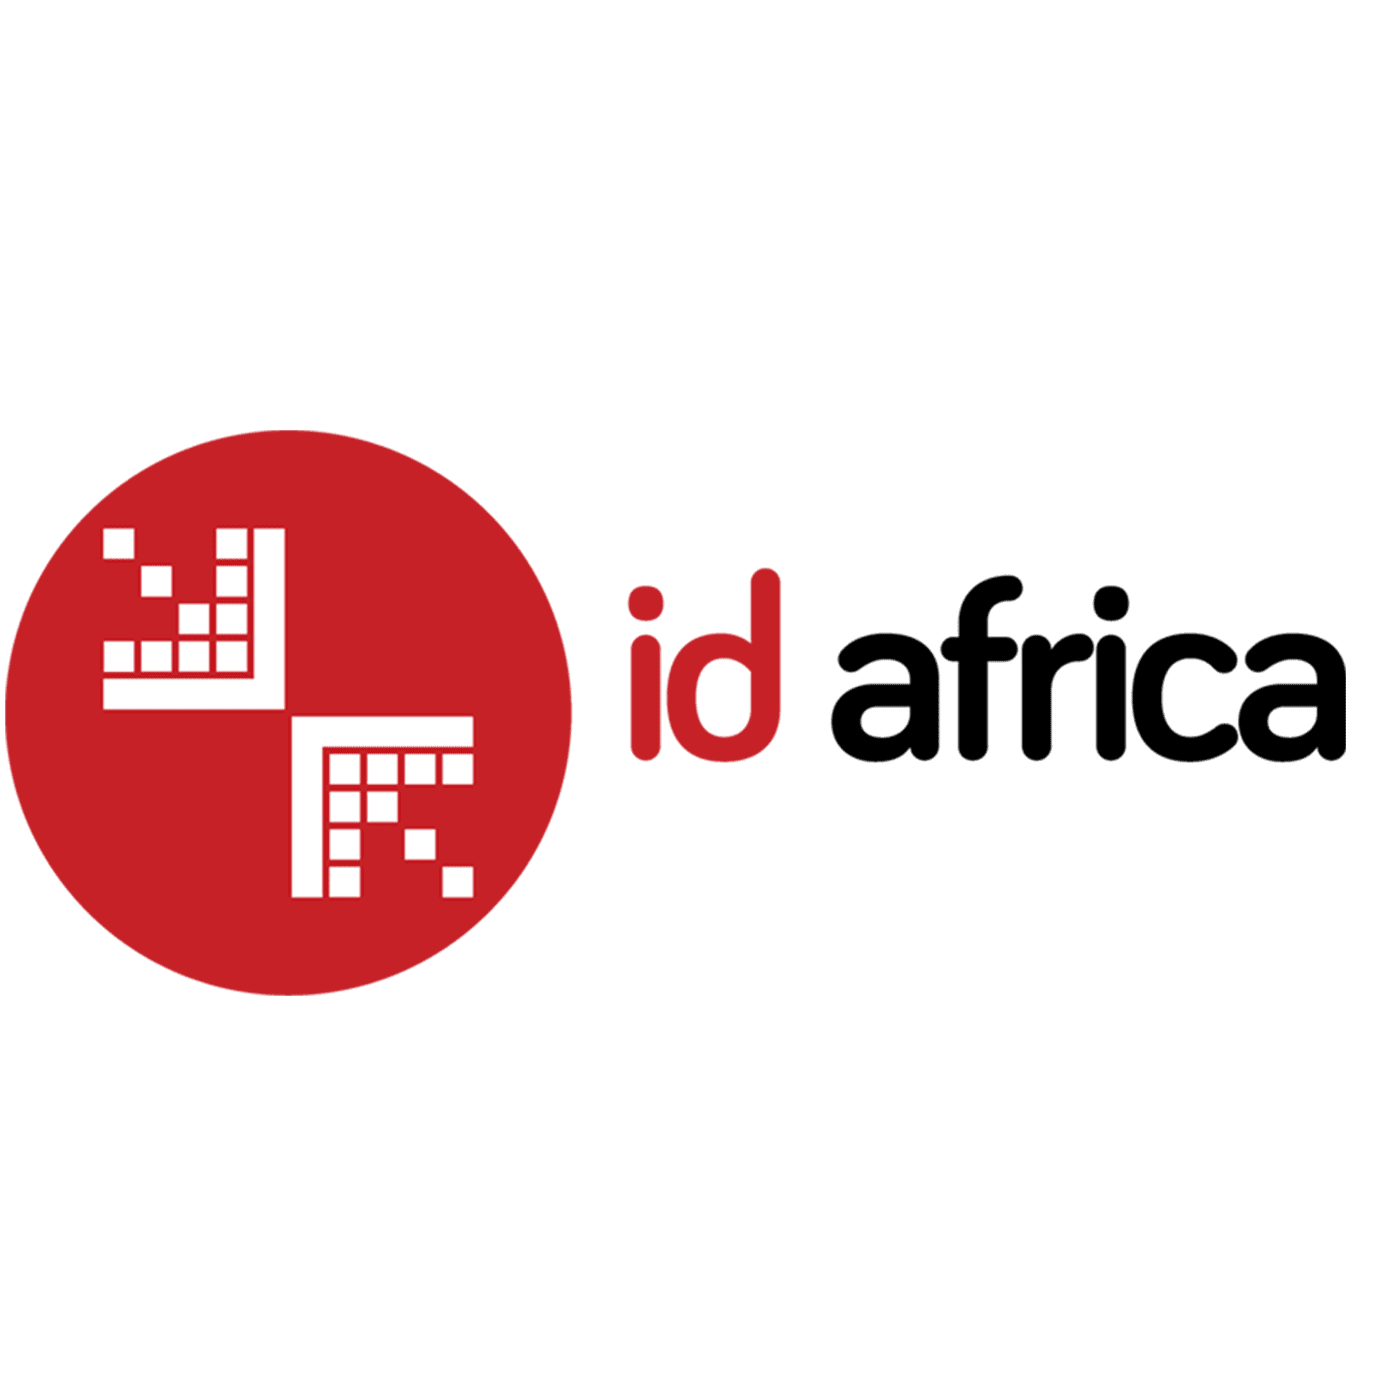 Letters 'id' written in red next to word 'Africa' written in black